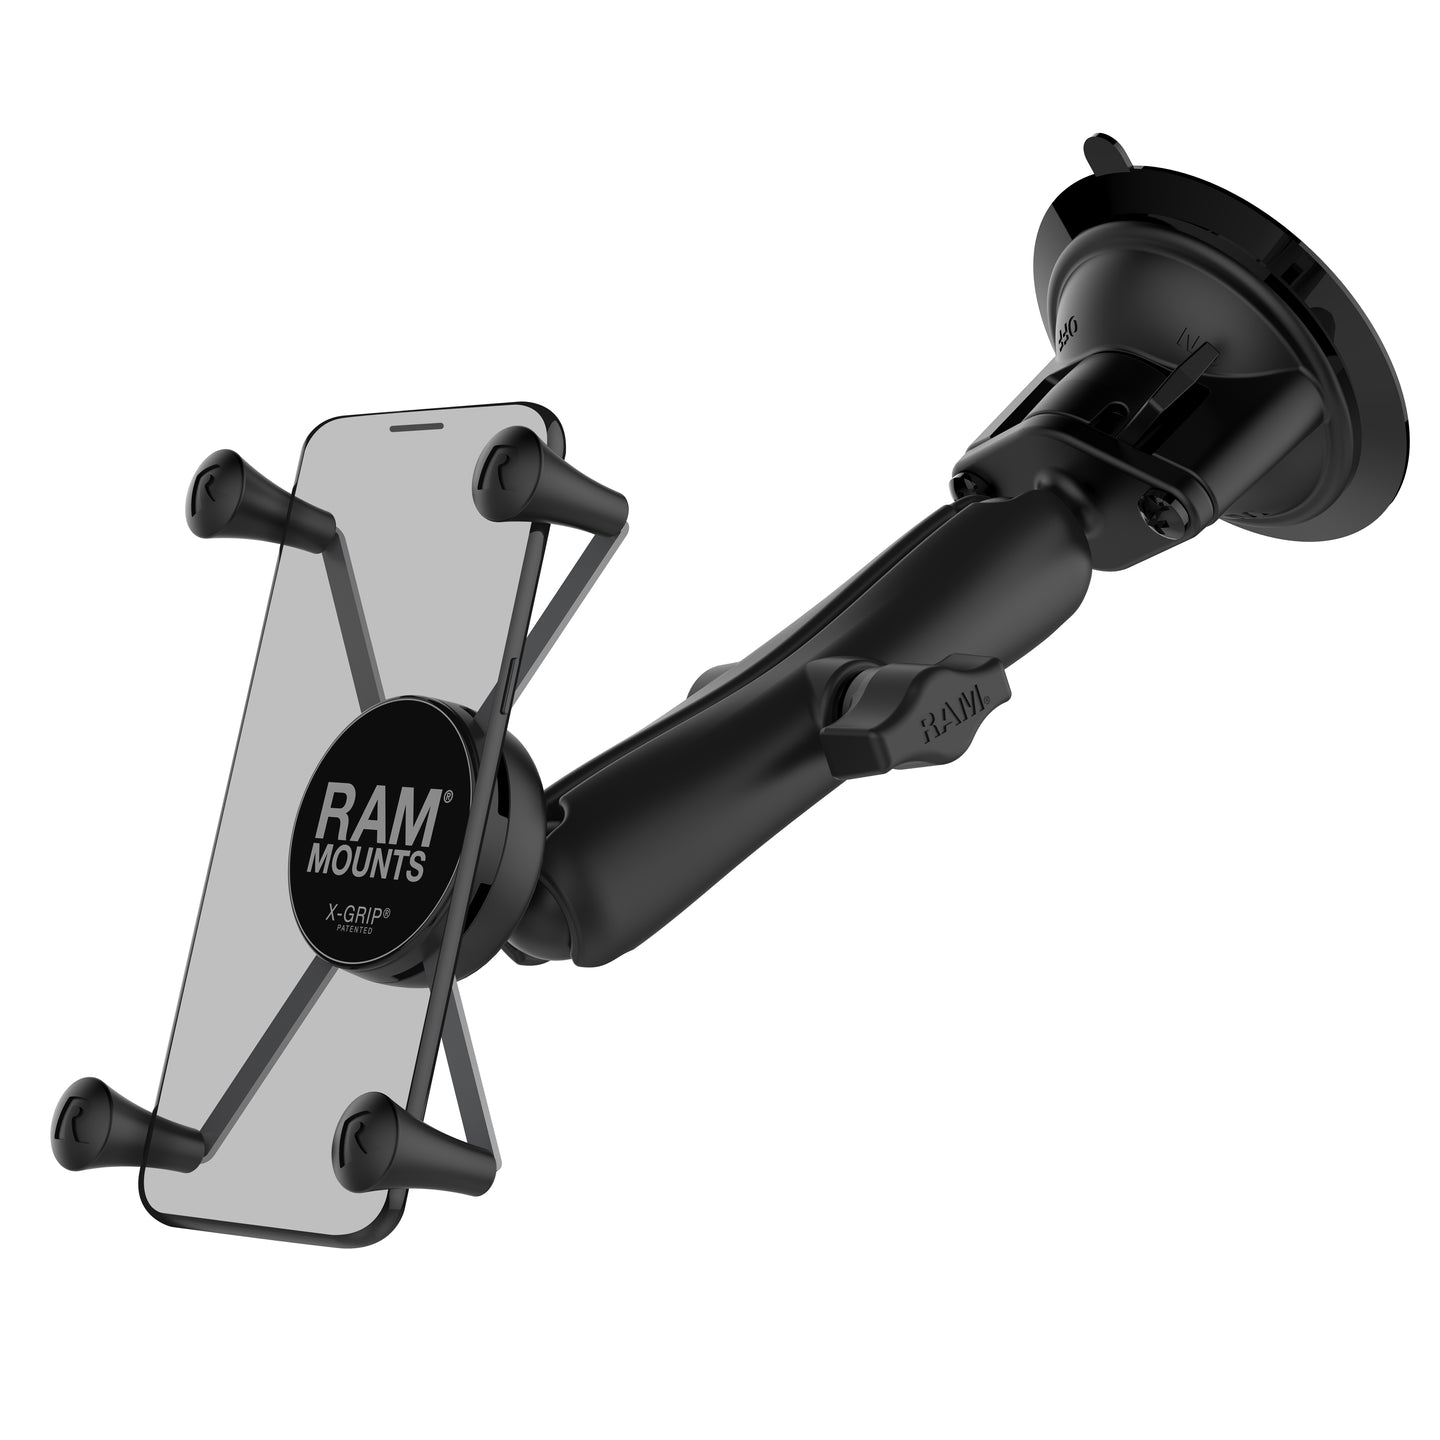 RAM Mounts X-Grip® Large Phone Mount with Twist-Lock™ Suction Cup - Long - image 1 of 3